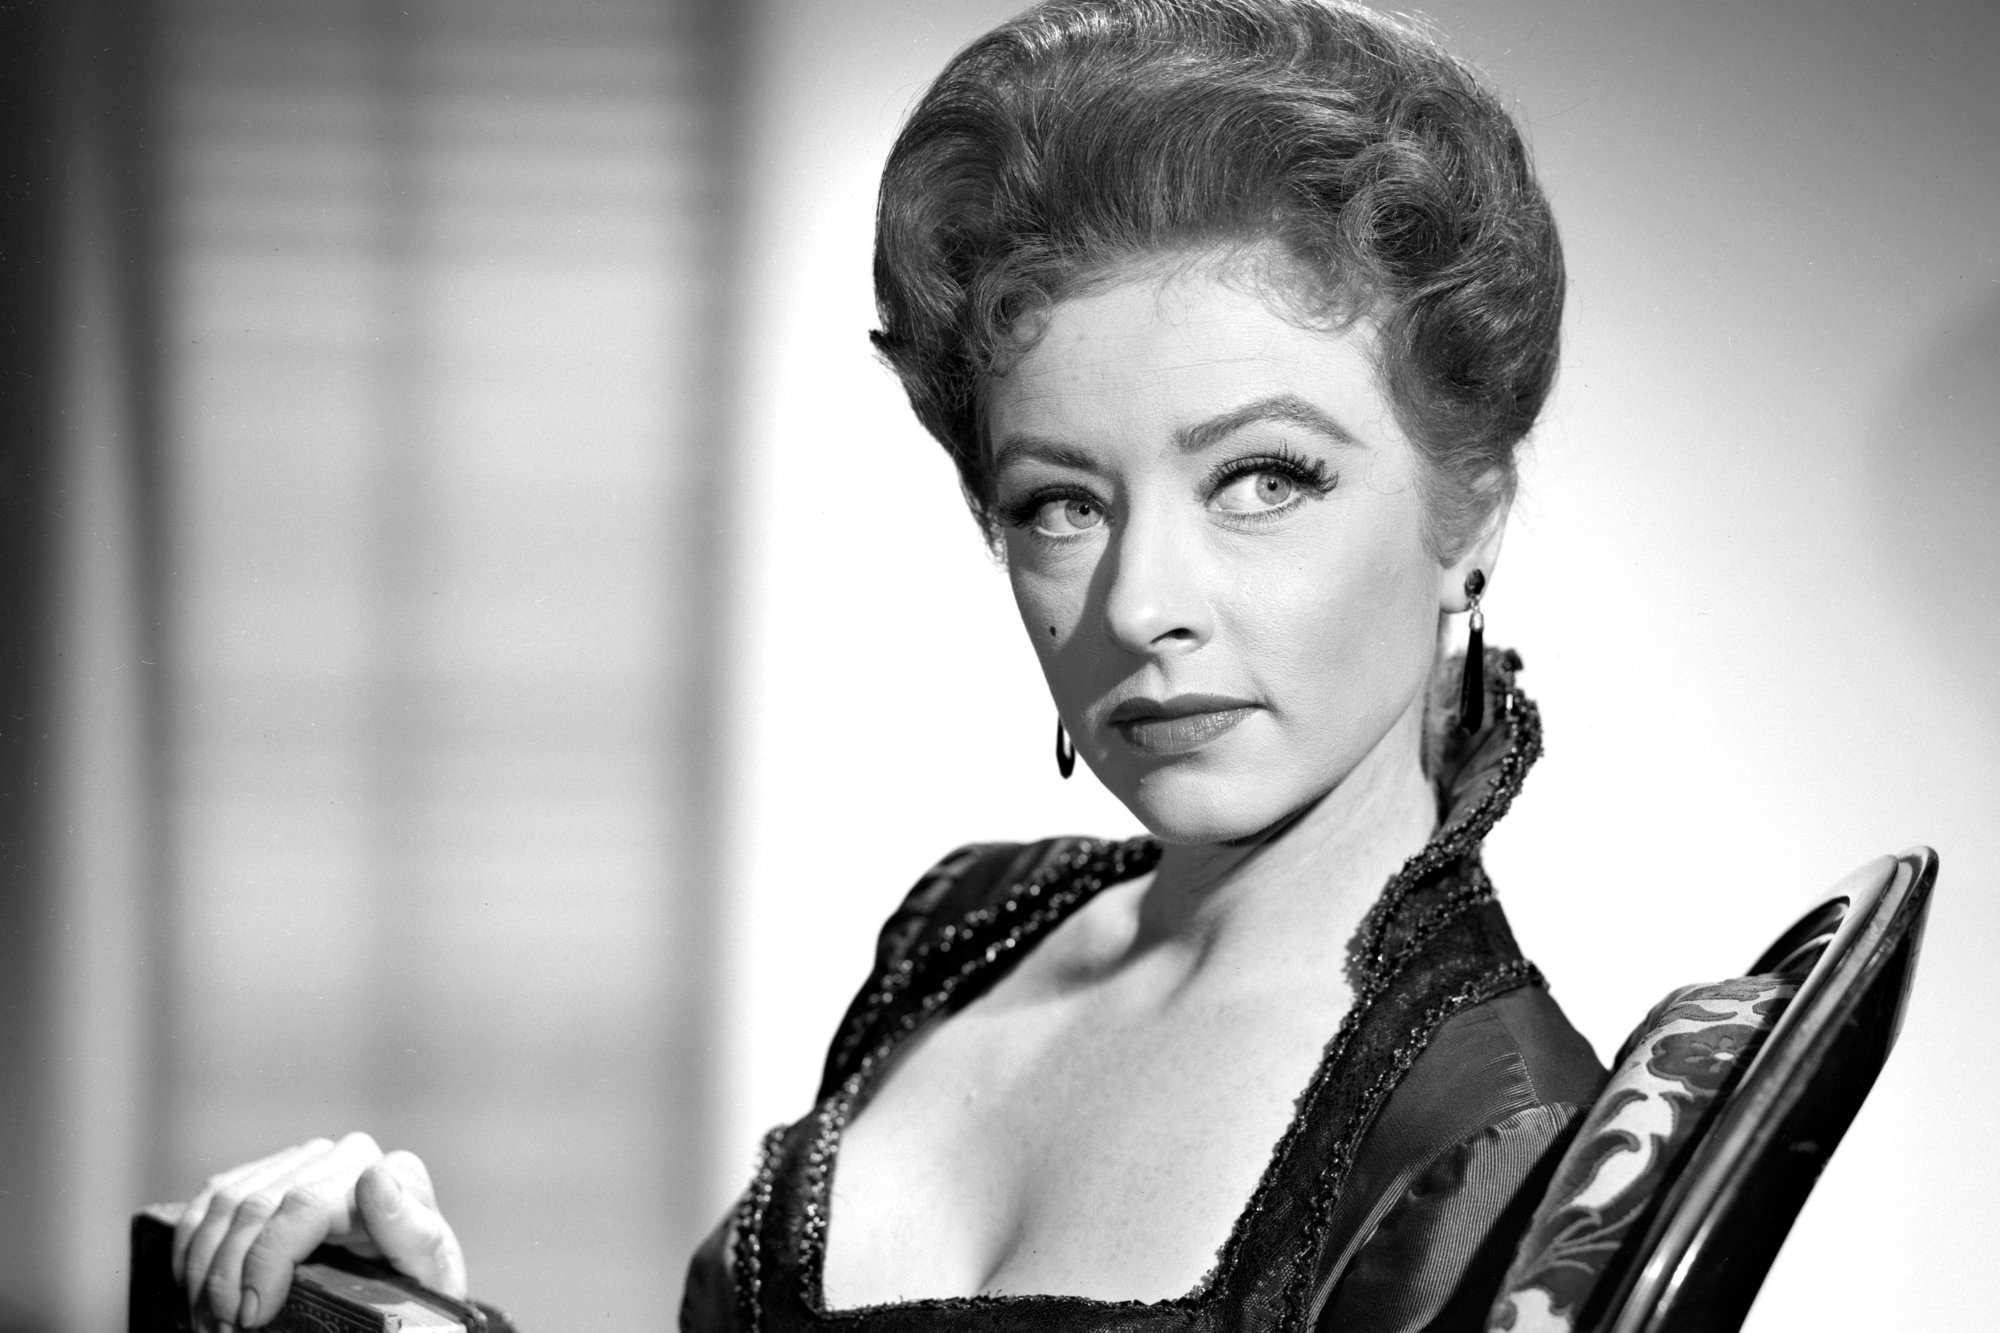 'Gunsmoke' Amanda Blake as Miss Kitty Russell in a black-and-white picture looking off to the side.